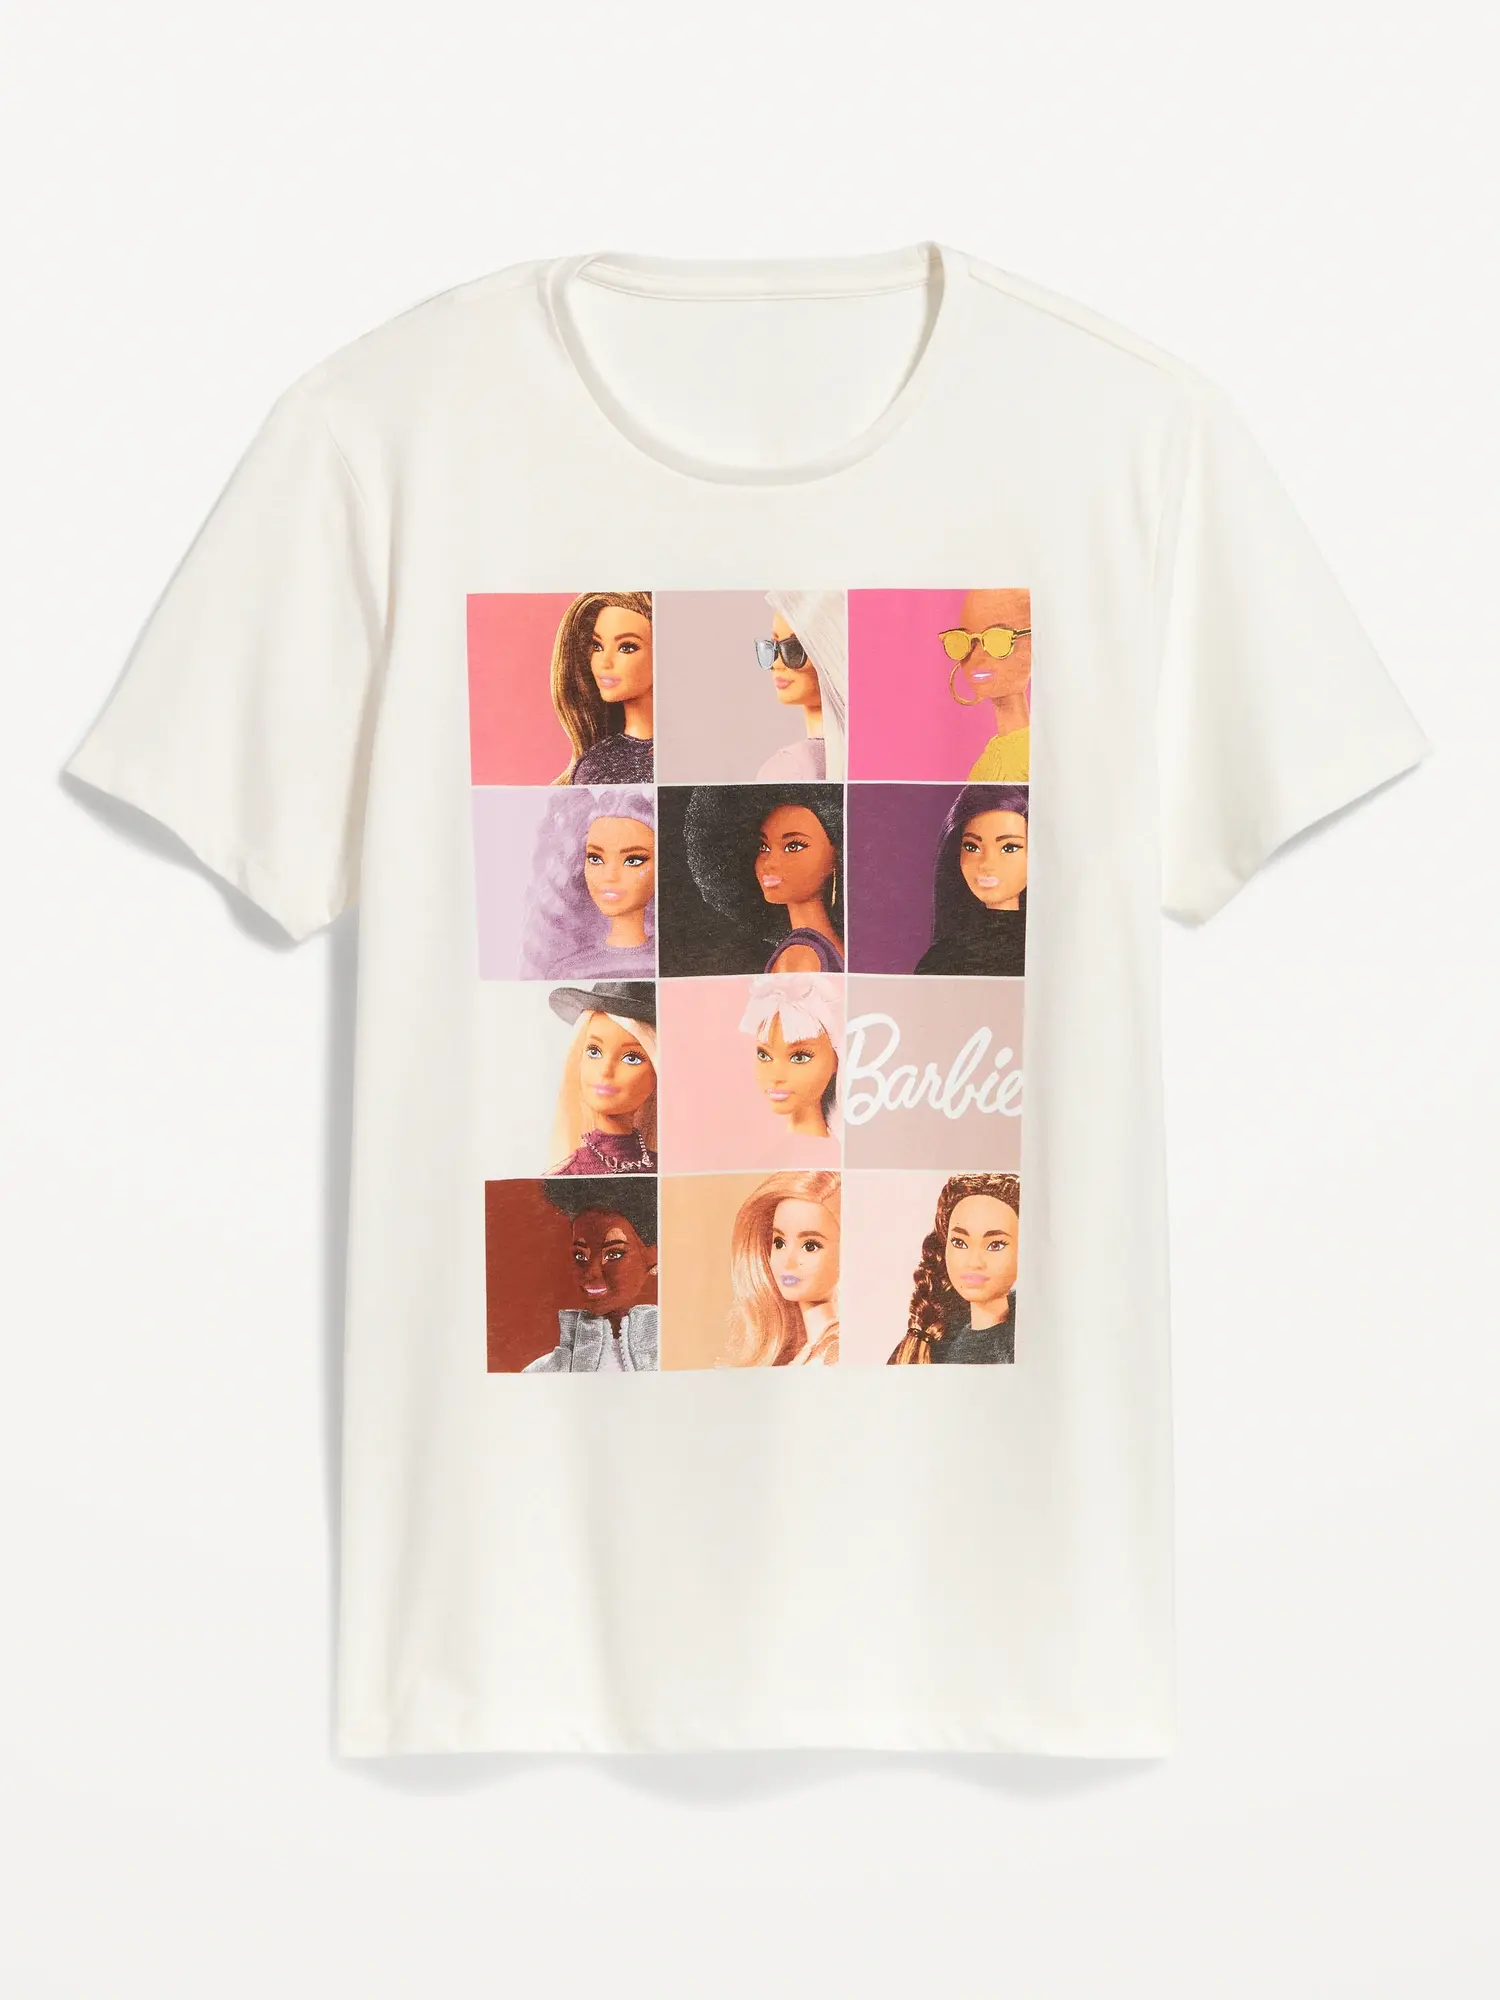 Old Navy Barbie™ Gender-Neutral T-Shirt for Adults white. 1